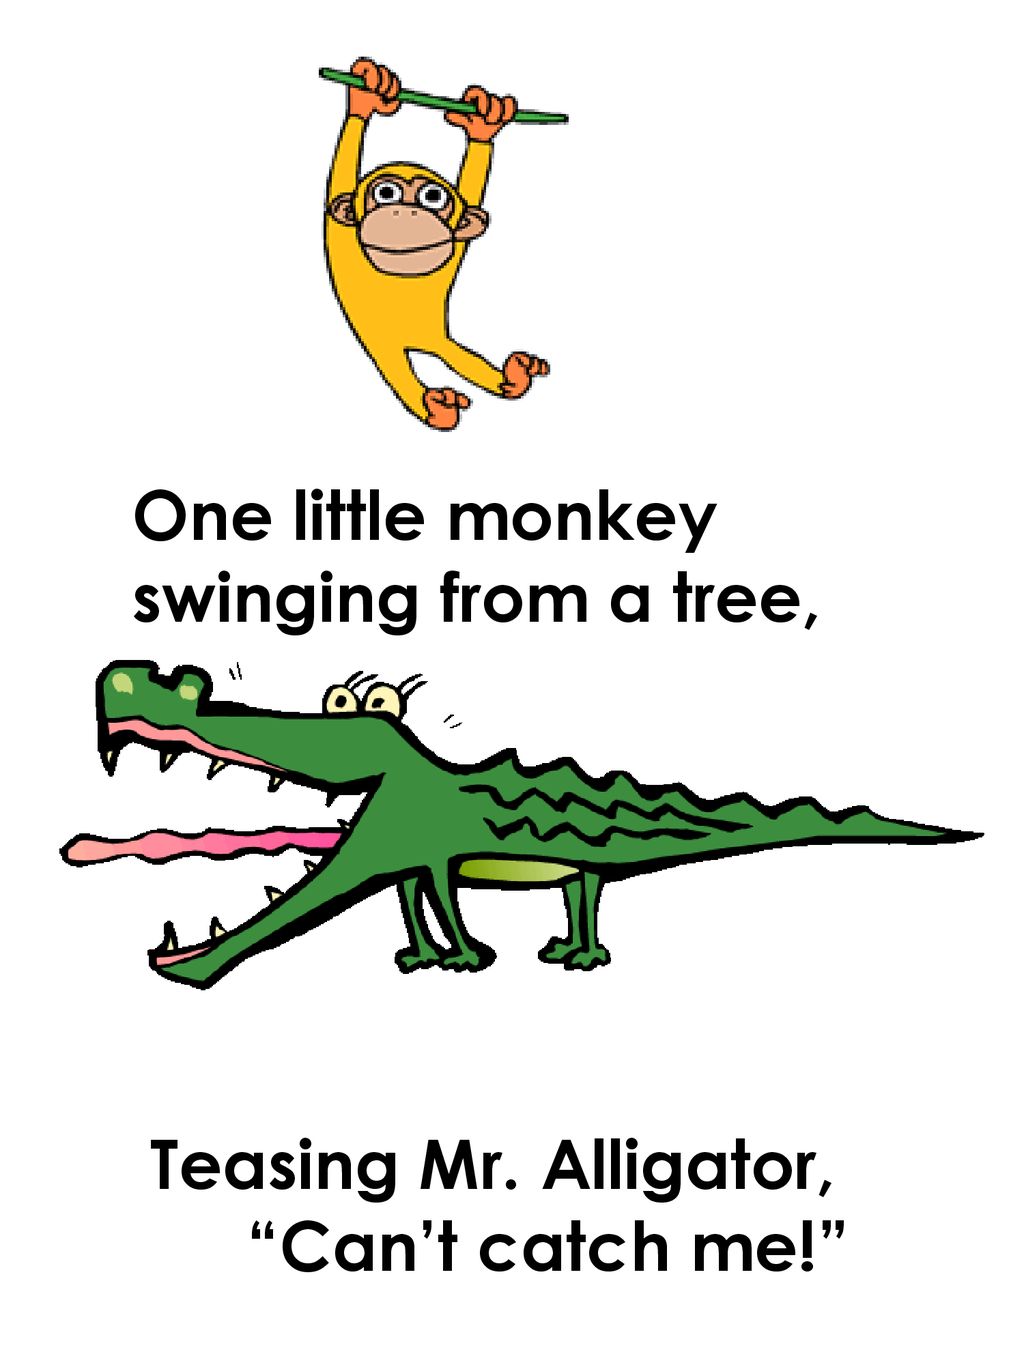 One little monkey swinging from a tree, Teasing Mr. Alligator, Can’t catch me!